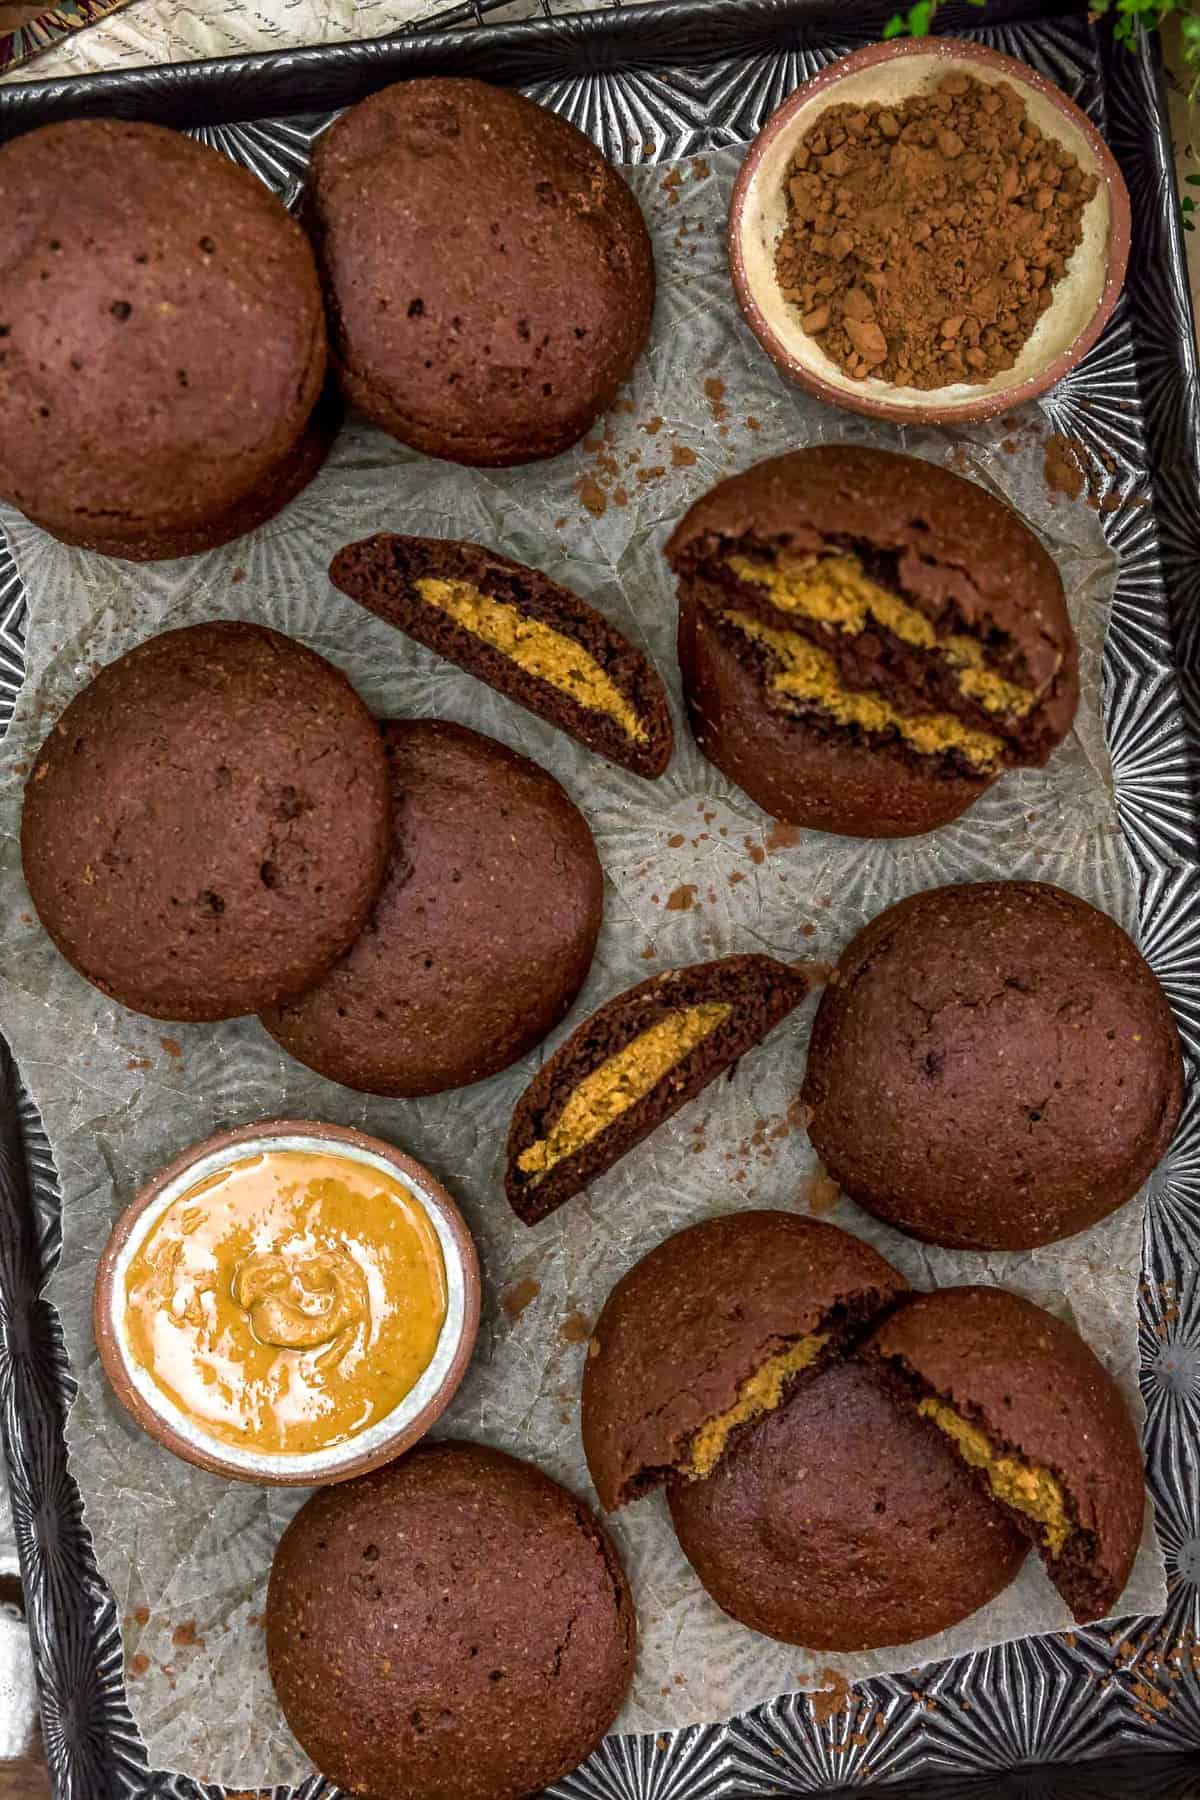 Tray of Chocolate Peanut Butter Stuffed Cookies